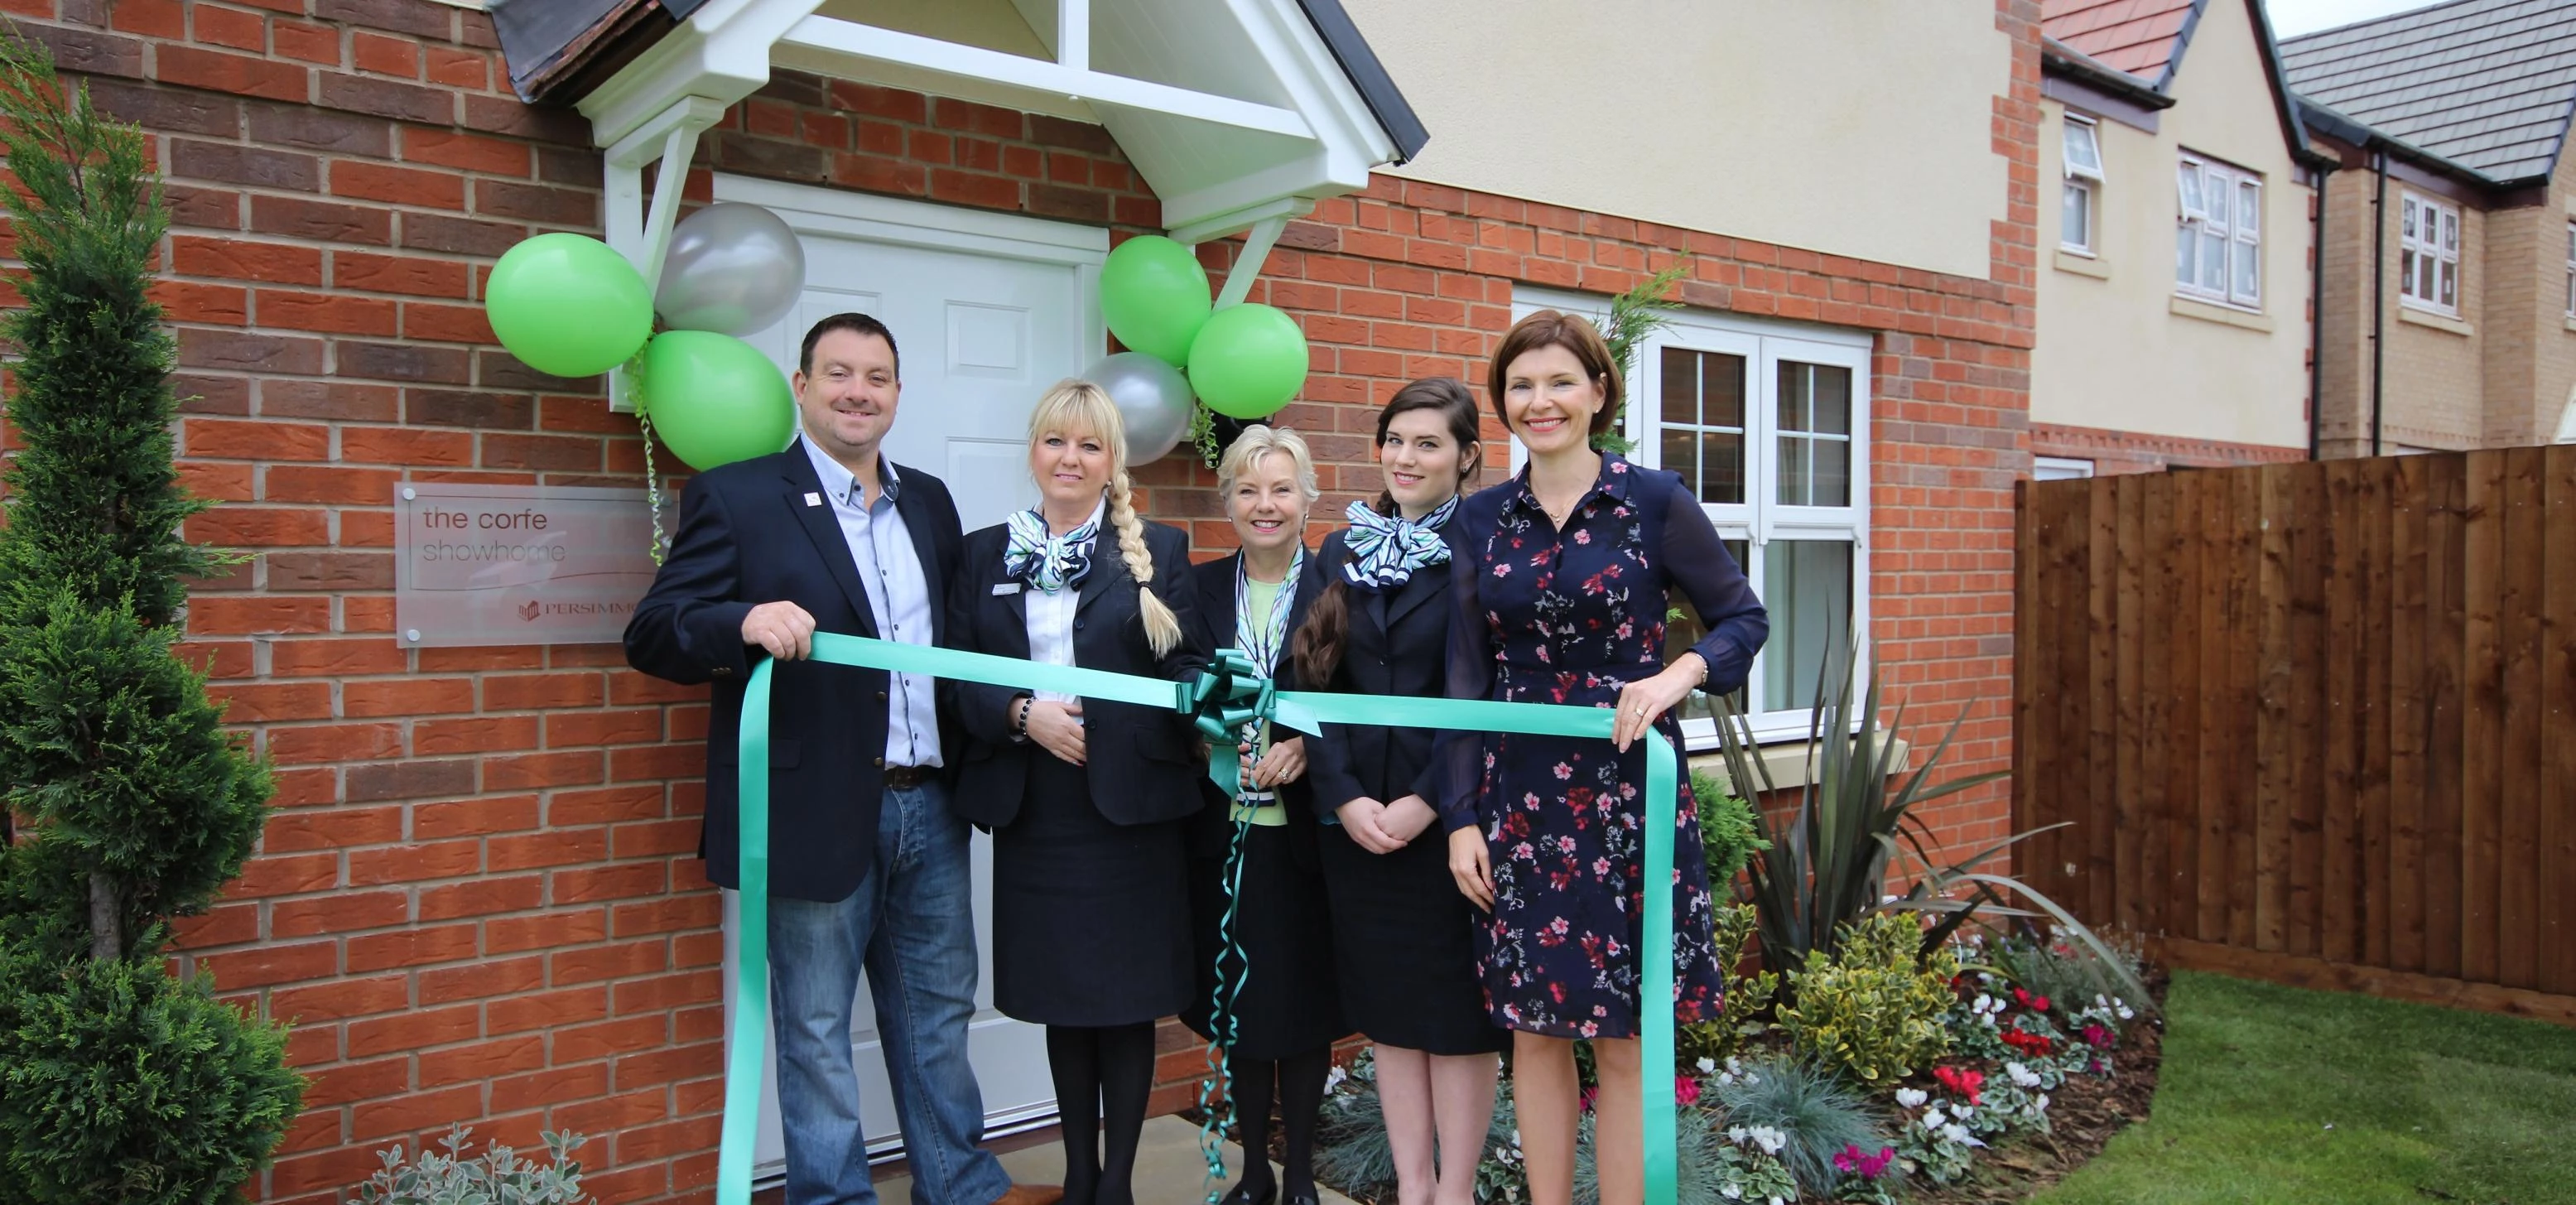 From left, Chris Curry of Niamh’s Next Step cuts the ribbon to open the Harlestone Manor showhome wi